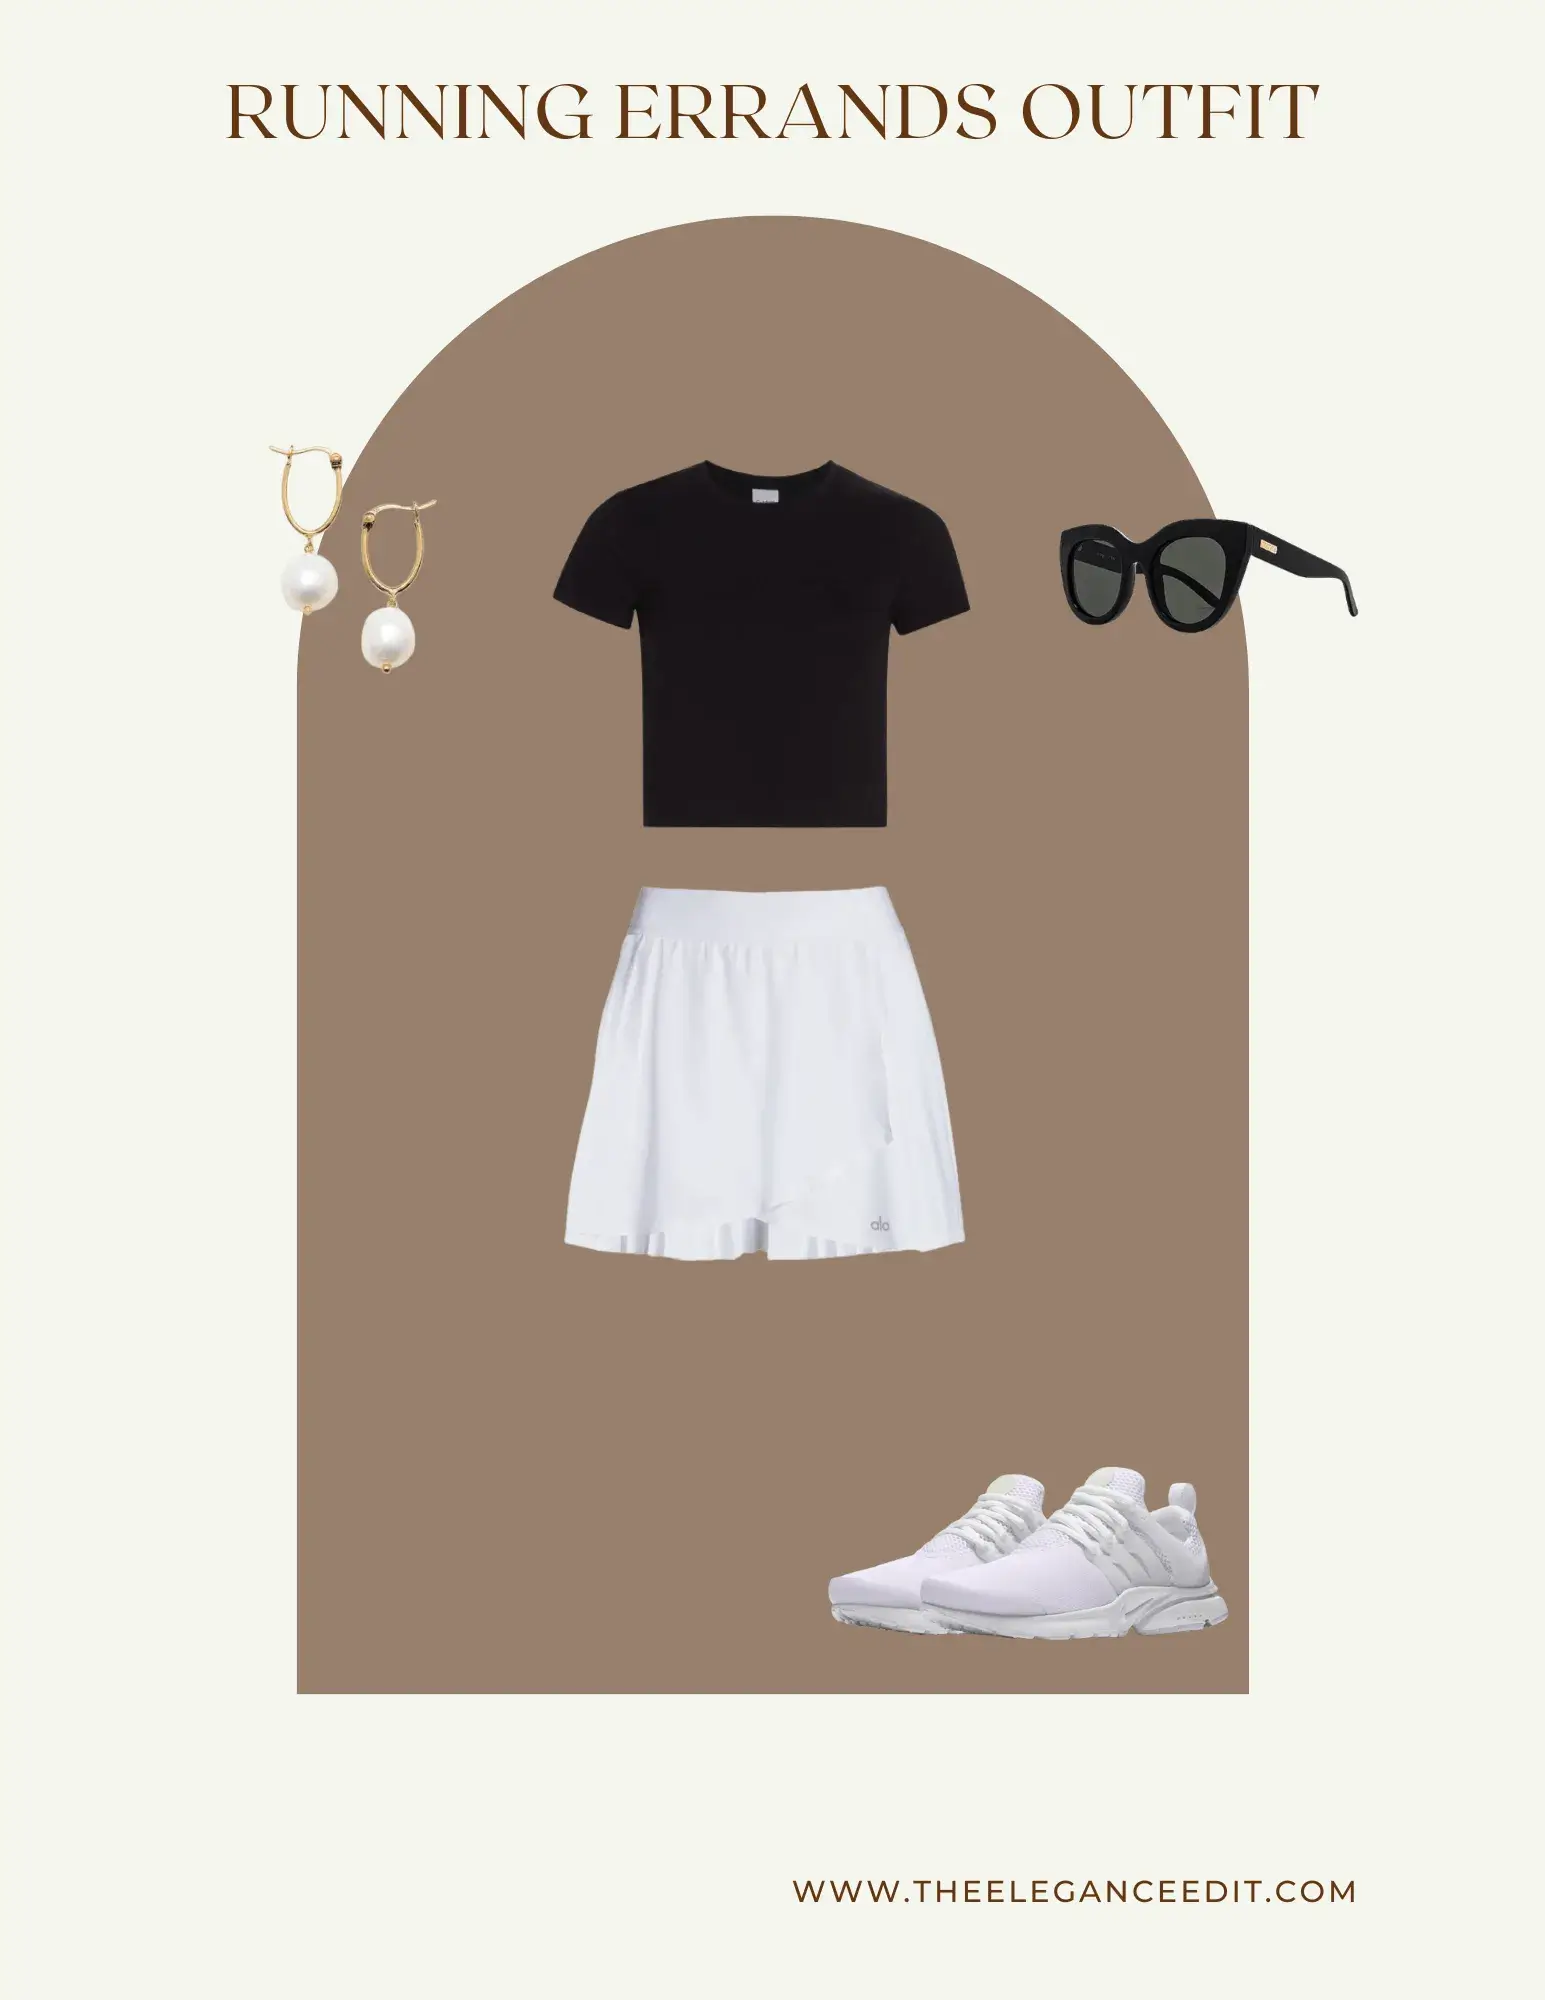 running errands athleisure outfit with tennis skirt and t-shirt